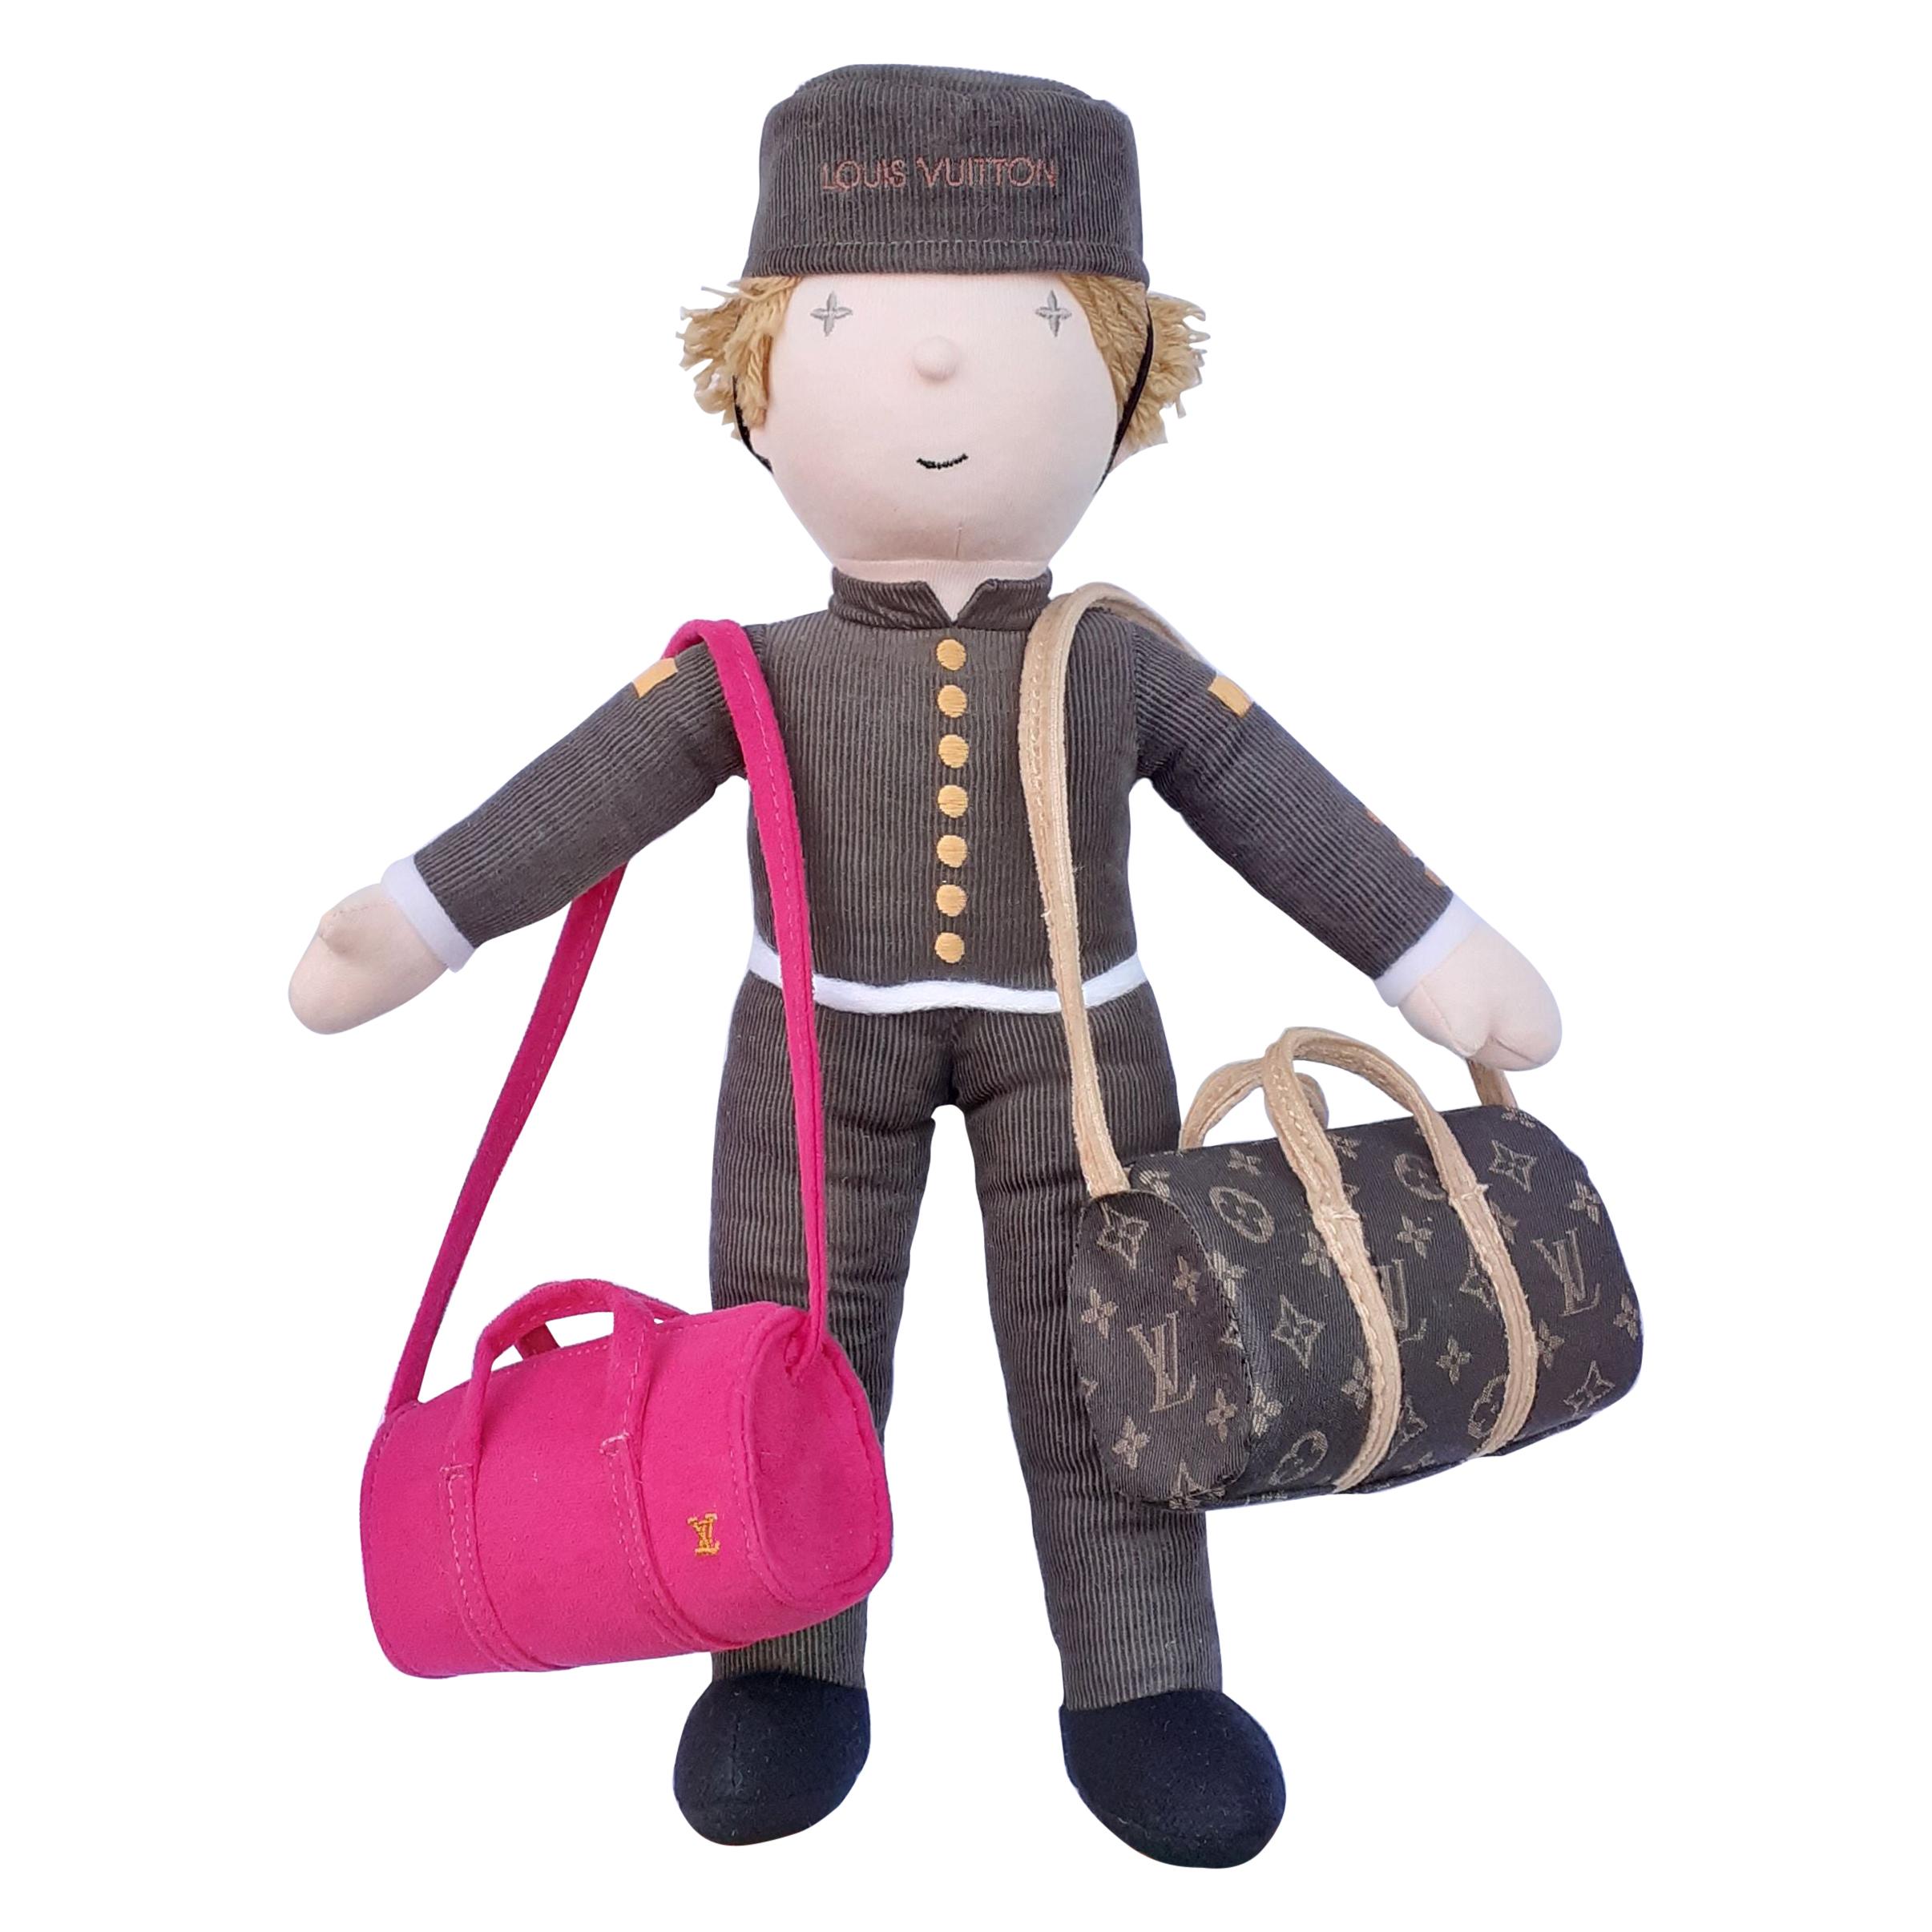  Louis Vuitton Groom Bellboy Doll VIP With 2 Keepall Bags RARE 